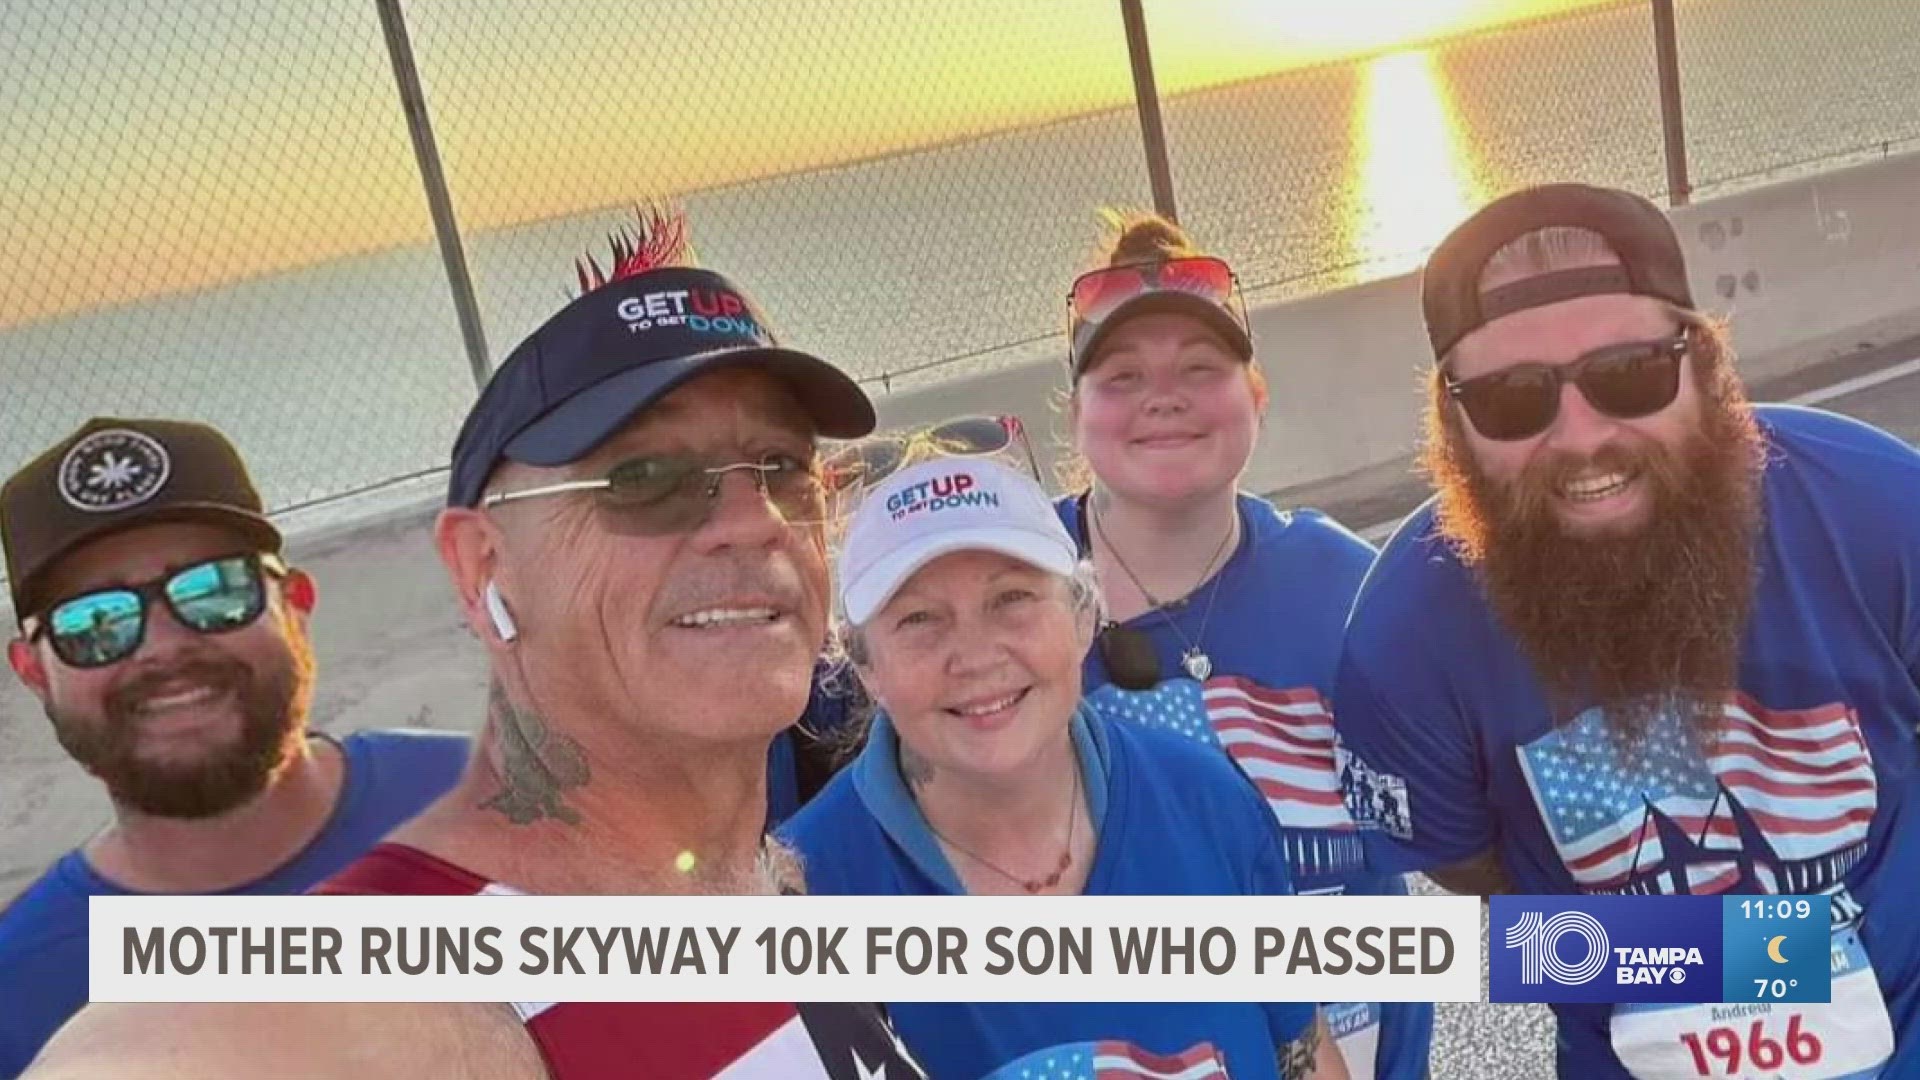 Last year, the family took a photo at the top of the bridge during the Skyway 10K. It was the last full family photo they ever took.